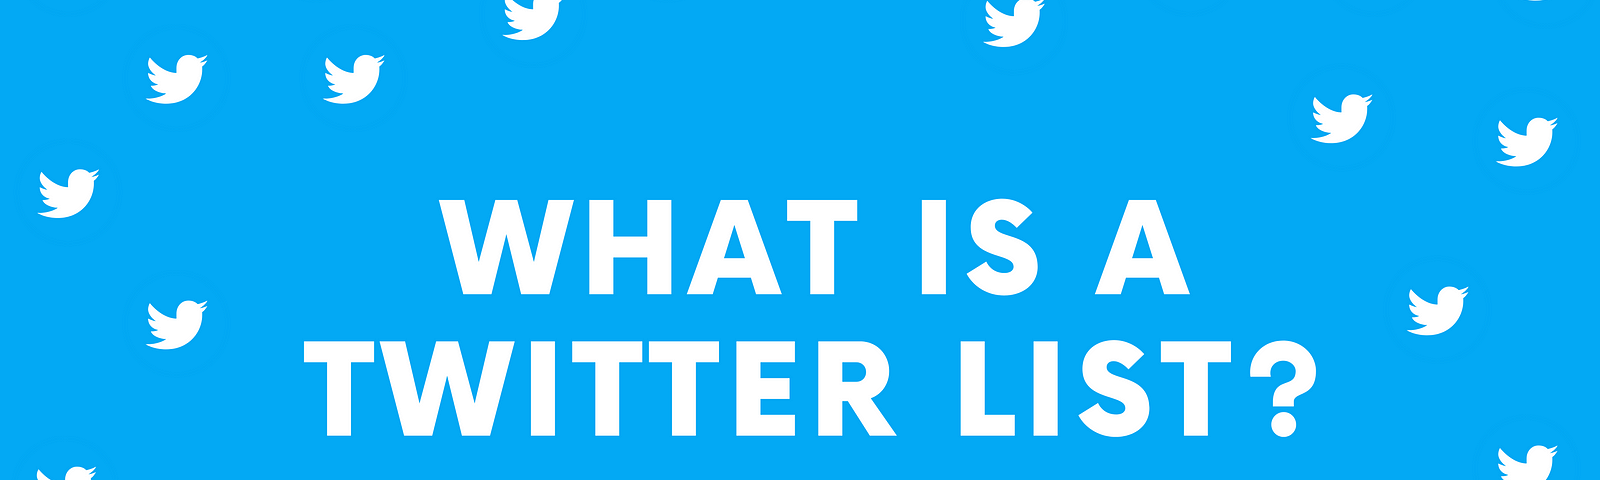 what is a twitter list, how to create twitter list, how to pin a list on twitter, twitter lists to follow, twitter list